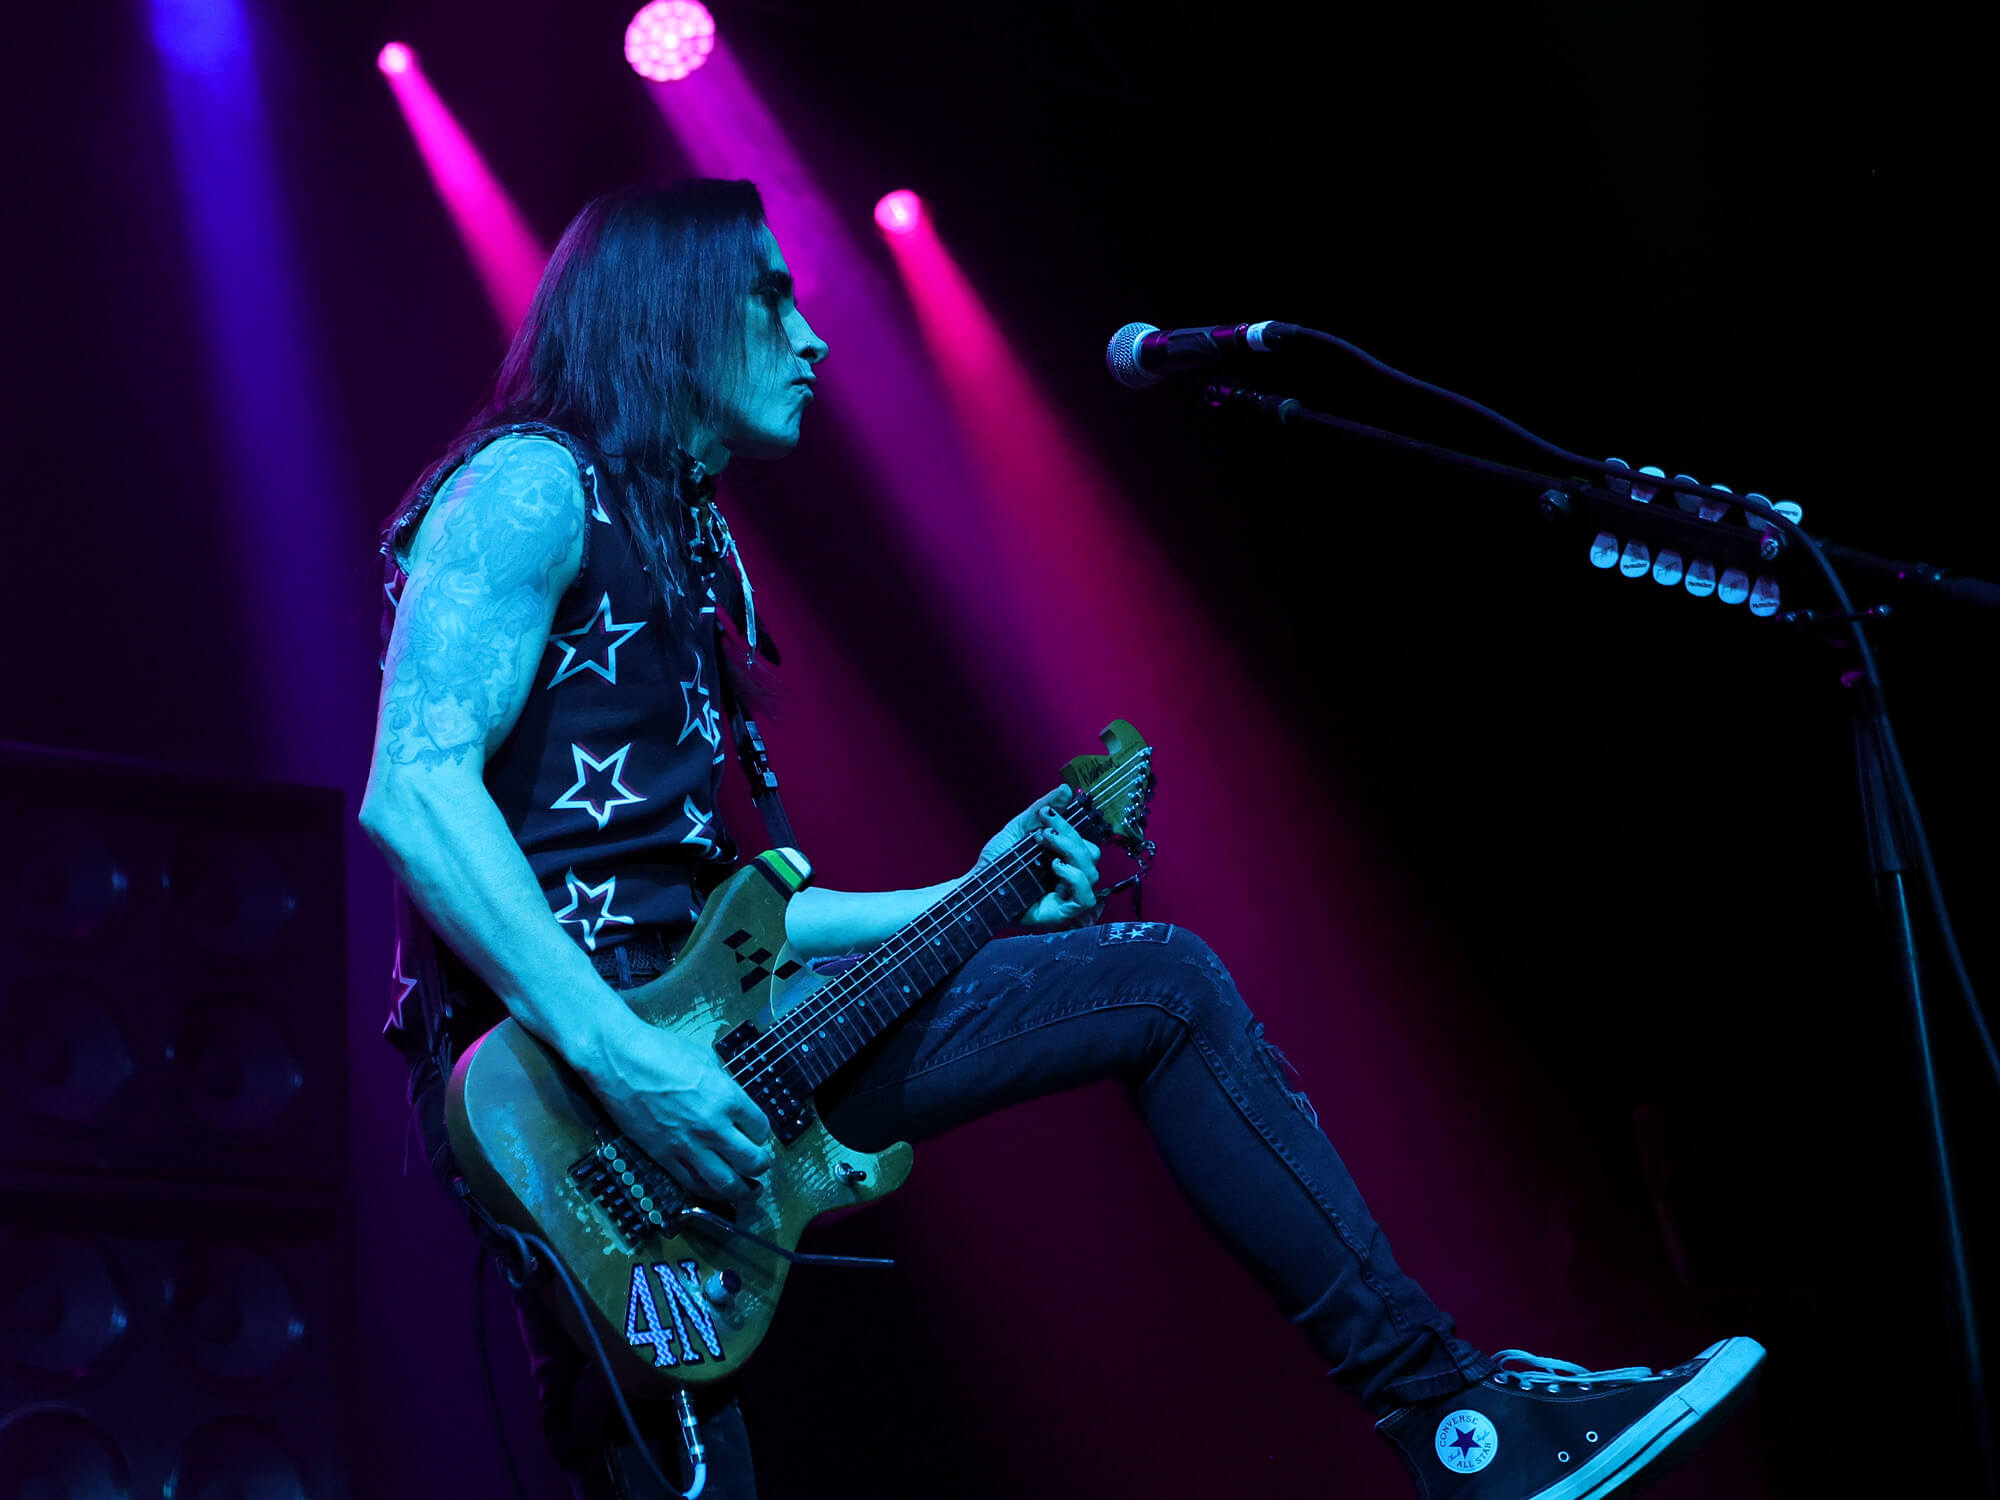 Nuno Bettencourt on stage. He has foot rested on a platform as he is playing guitar.